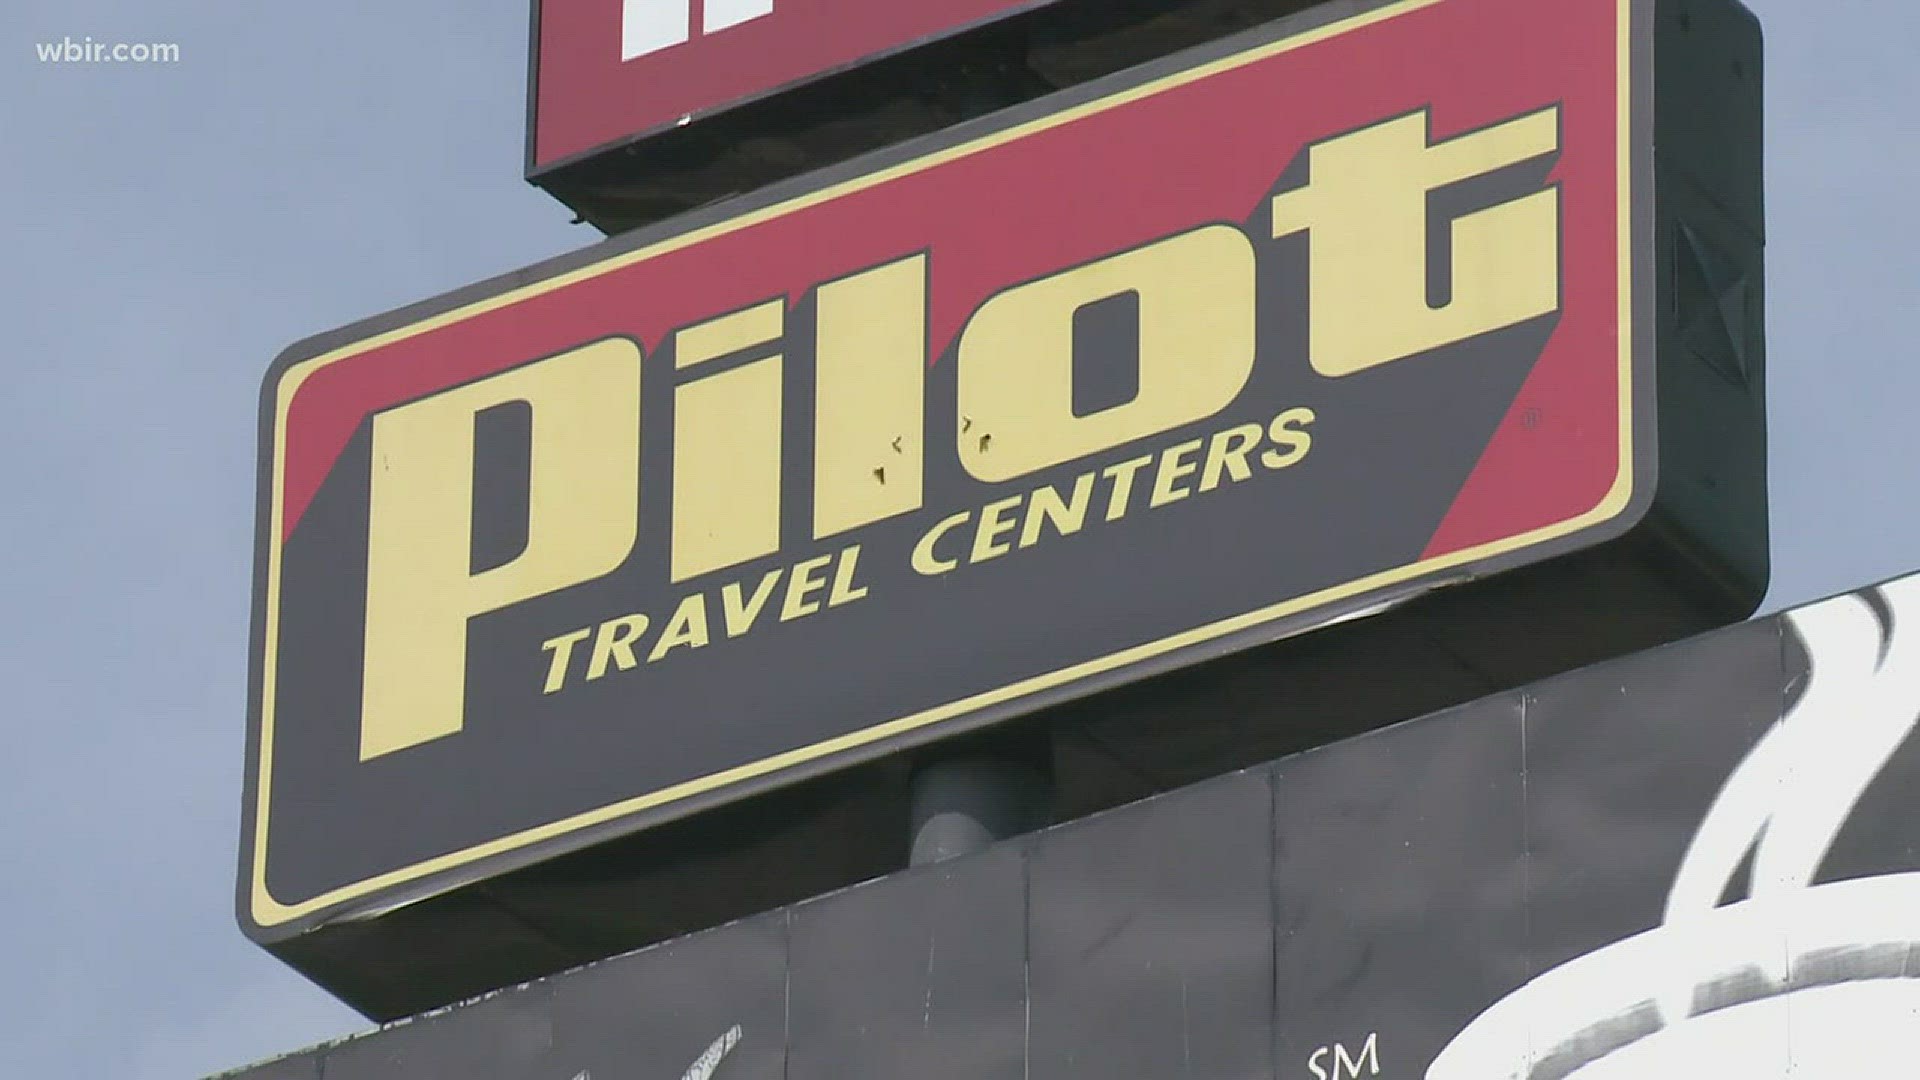 Jan. 10, 2018: A former Pilot Flying J fuel salesman testified during the federal fraud trial that he and other employees knew they were cheating trucking customers.